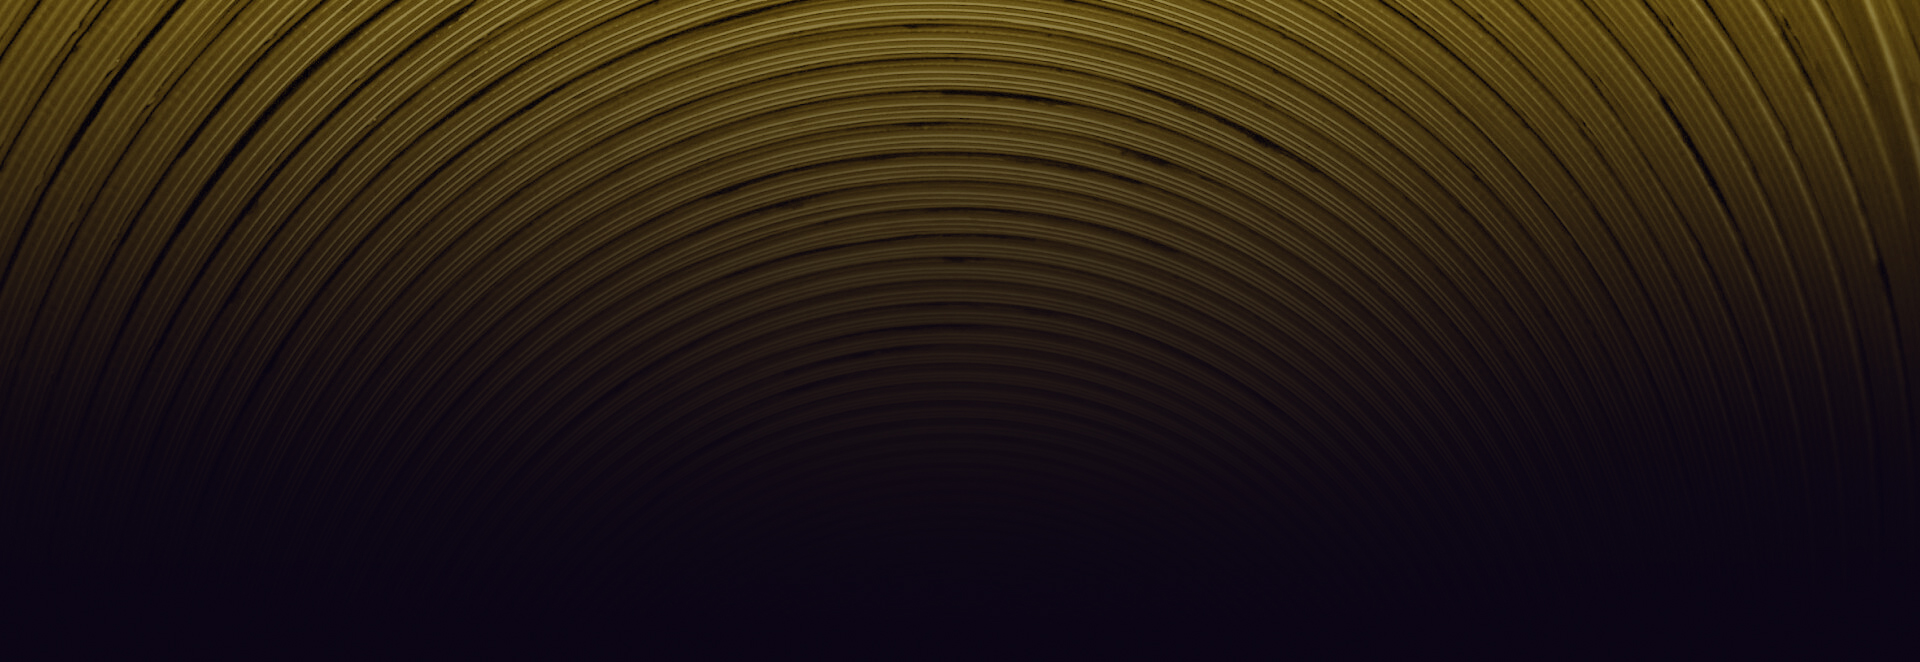 Dark yellow graphic with geometric concentric circles